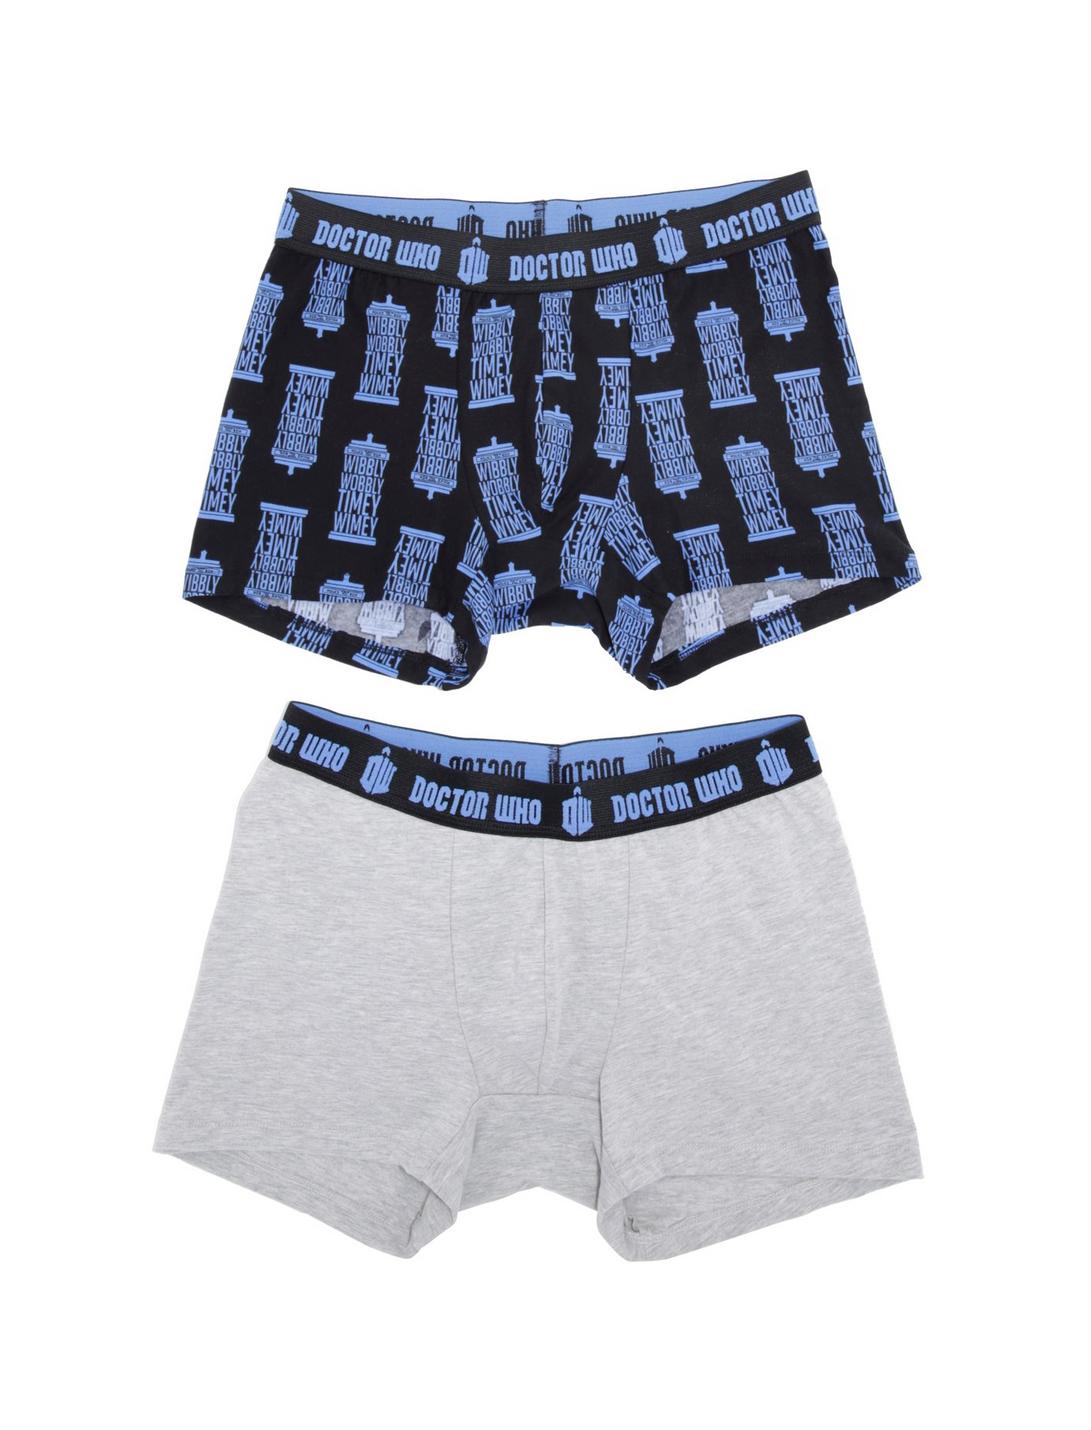 Doctor Who Boxer Brief 2 Pack, MULTI, hi-res